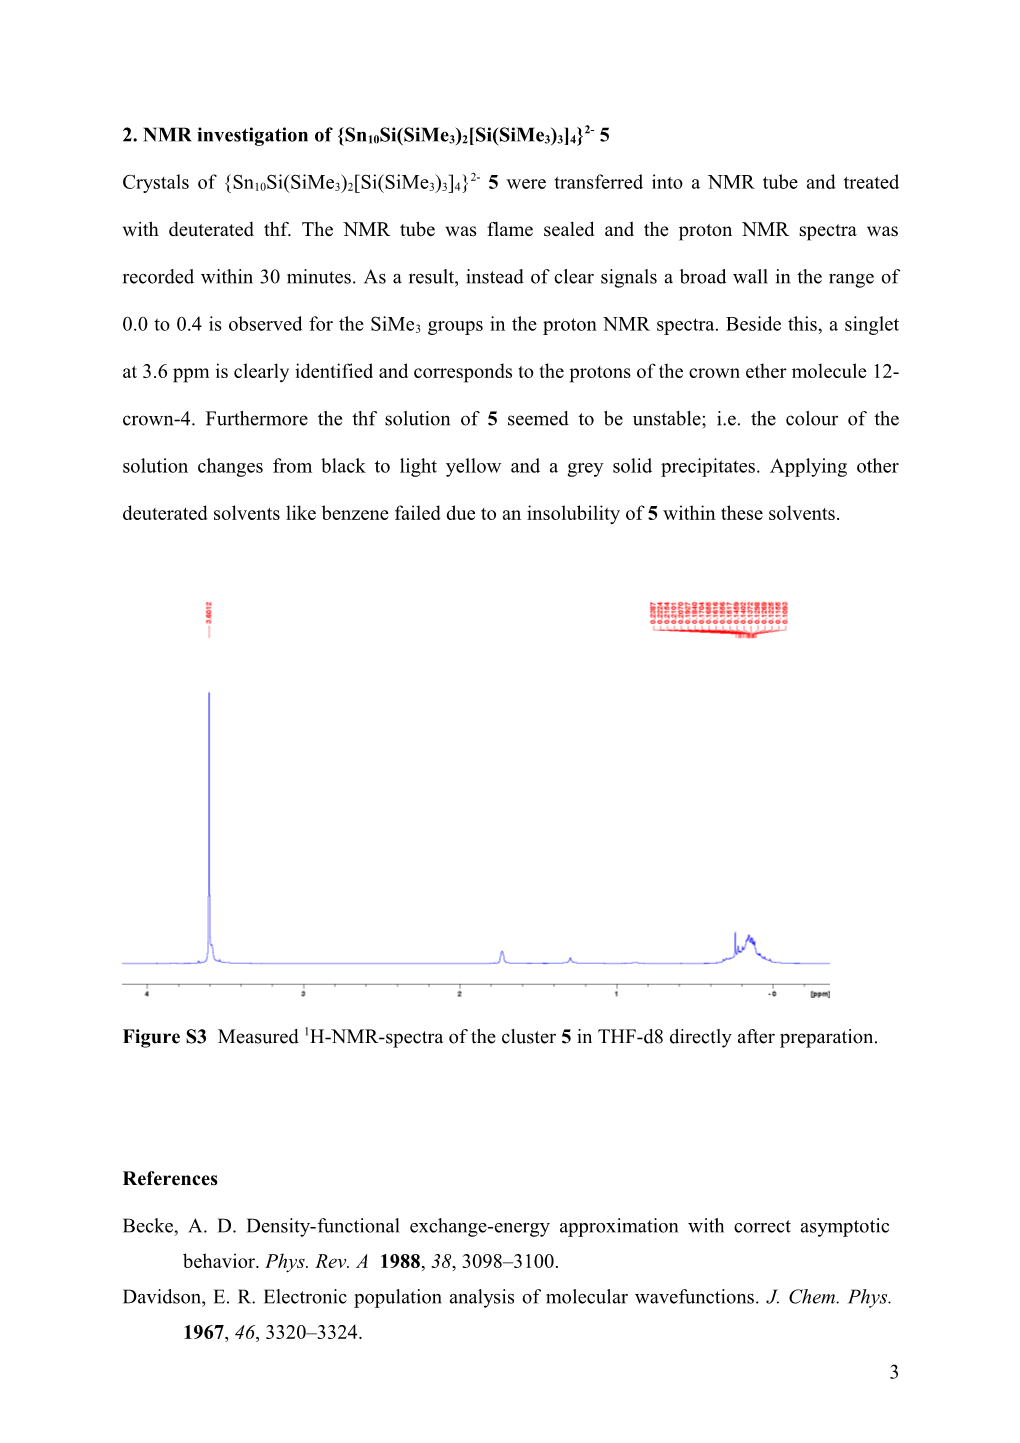 The Formation of a Metalloid Sn10 Si(Sime3)3 6 Cluster Compound and Its Relation to The